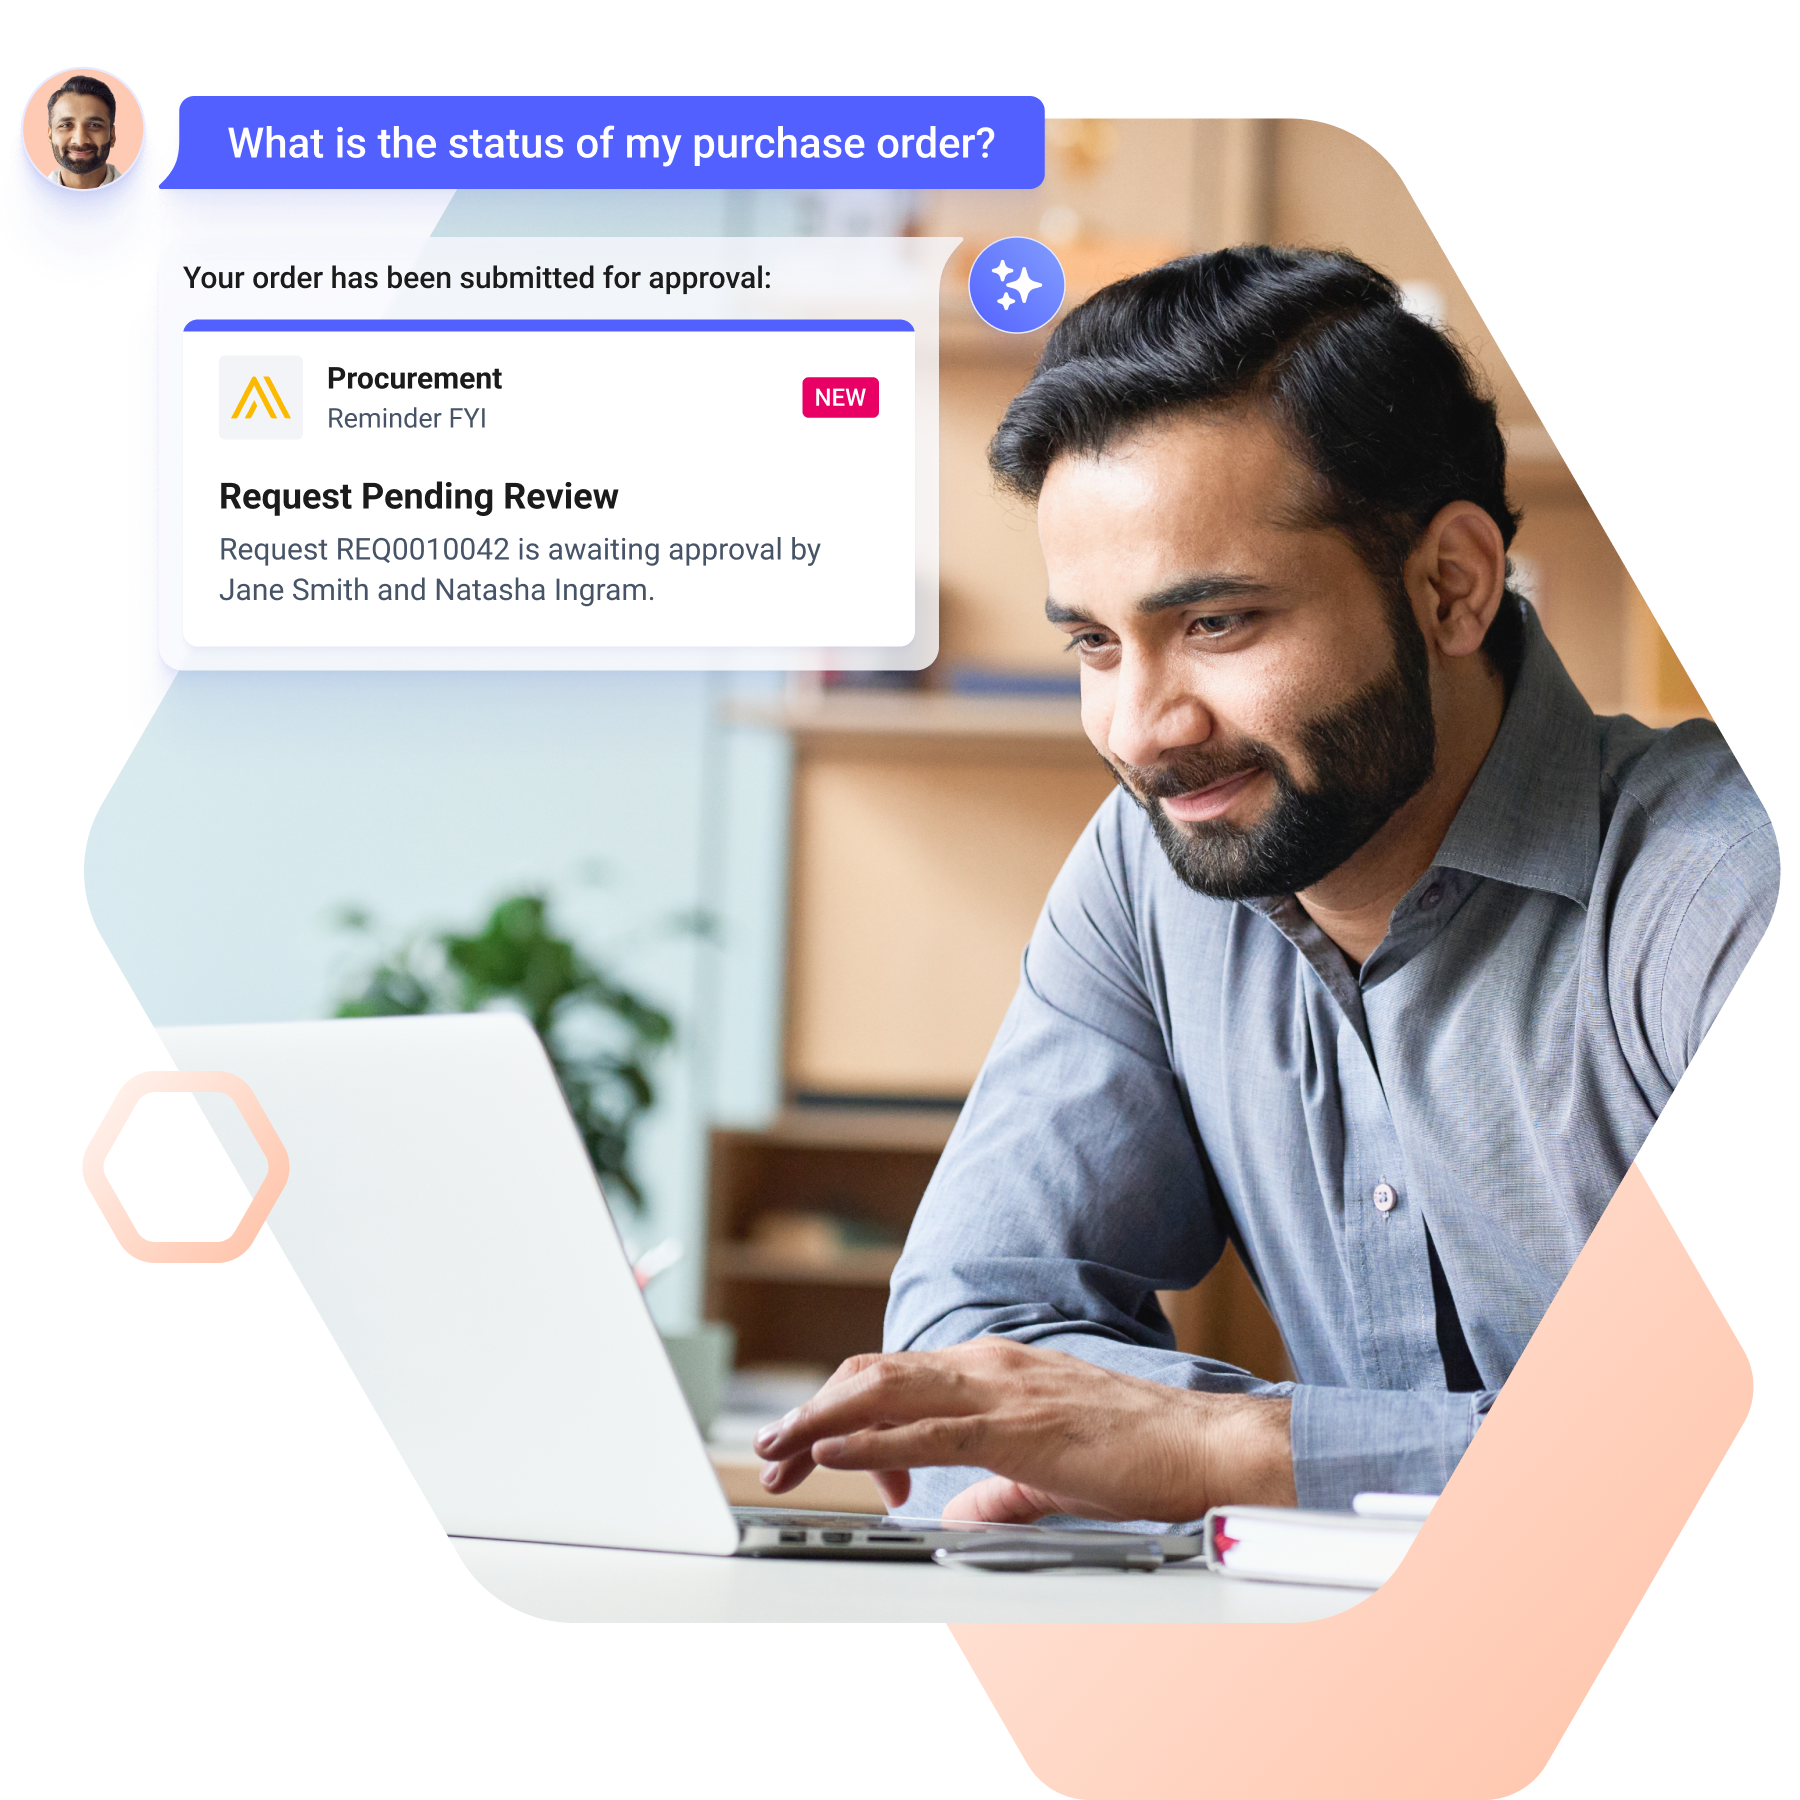 Make it easier for employees to manage expenses and purchase orders. Leverage conversational AI to surface purchase order and expense policies, triggered by employees' natural-language searches. 